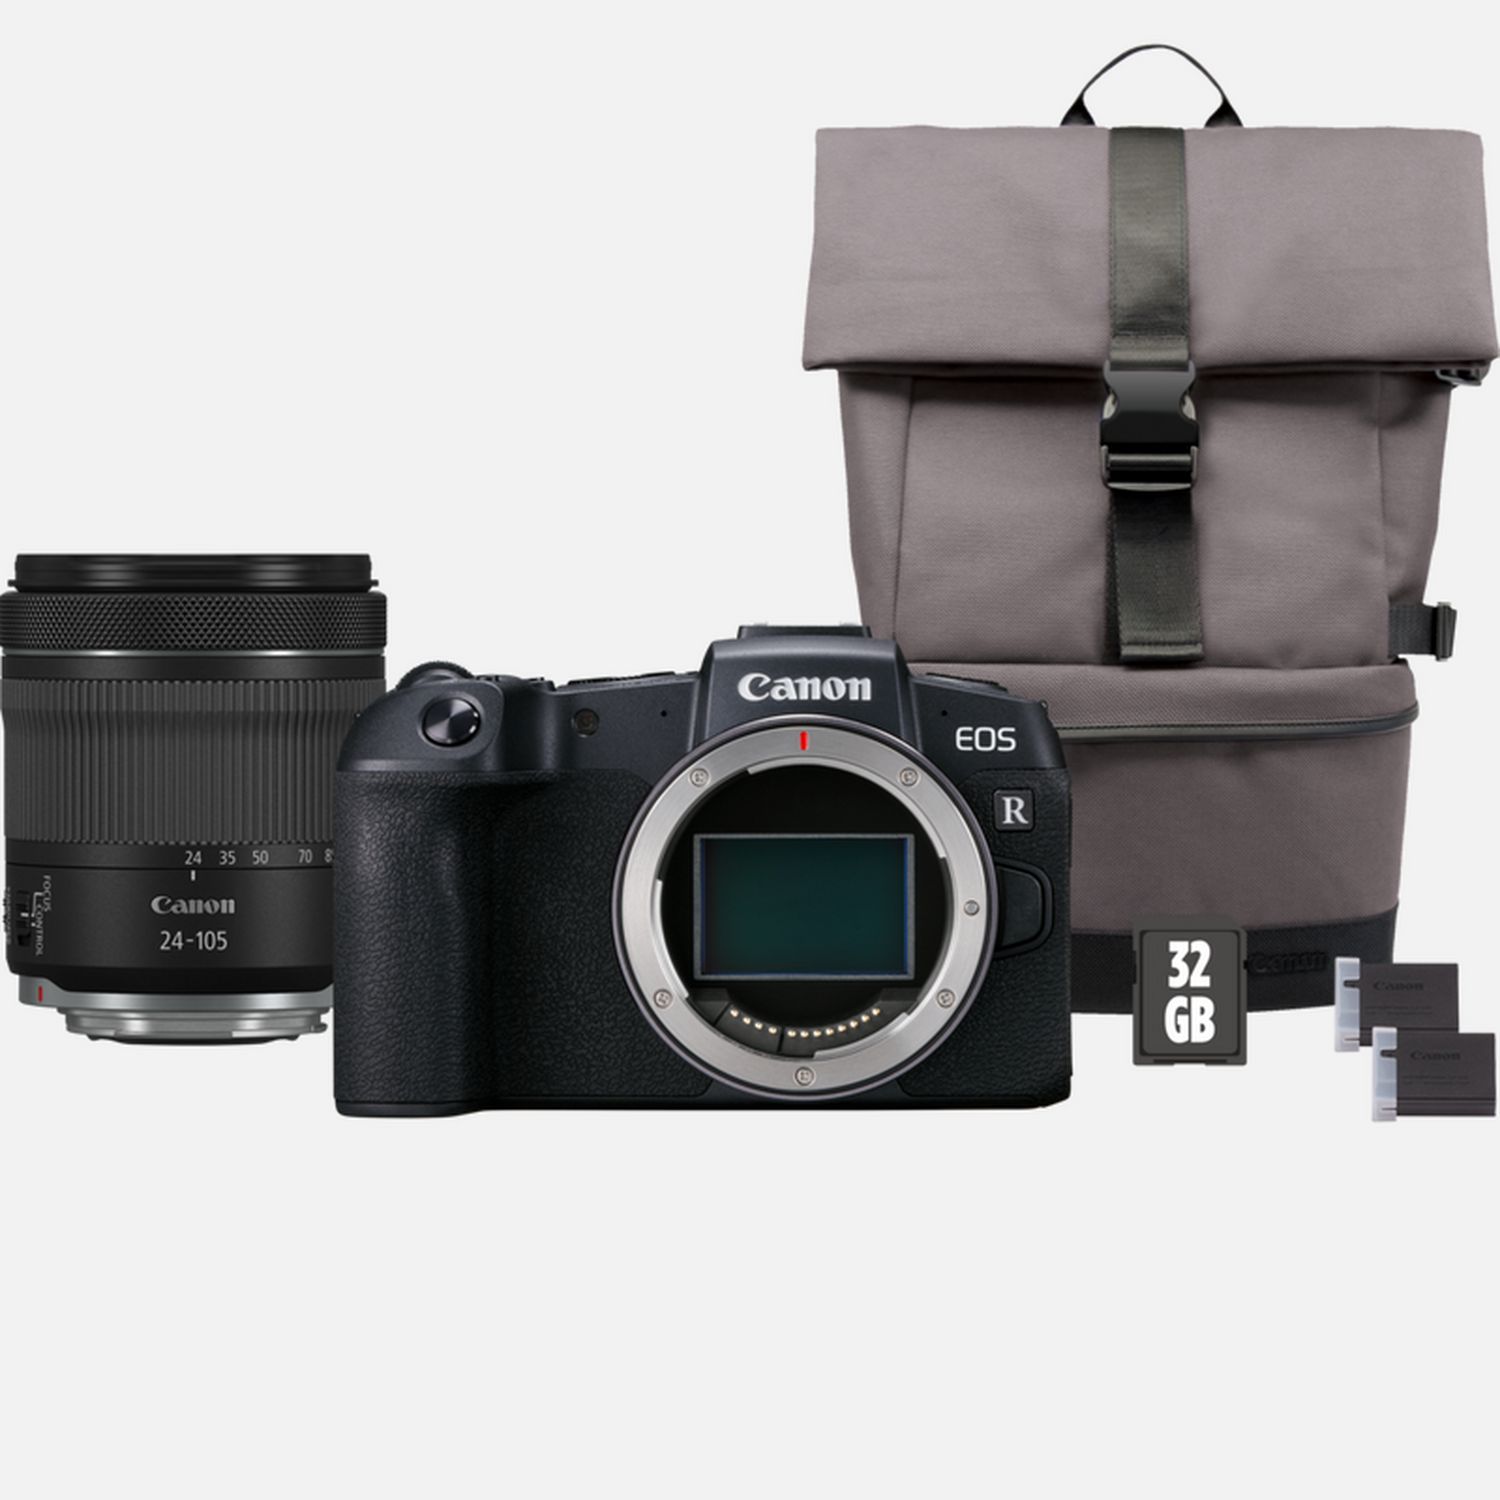 Buy Canon STM Spare Wi-Fi Canon EOS + Lens Body IS — + Battery SD card in + UAE RP RF 24-105mm Cameras Backpack + Store